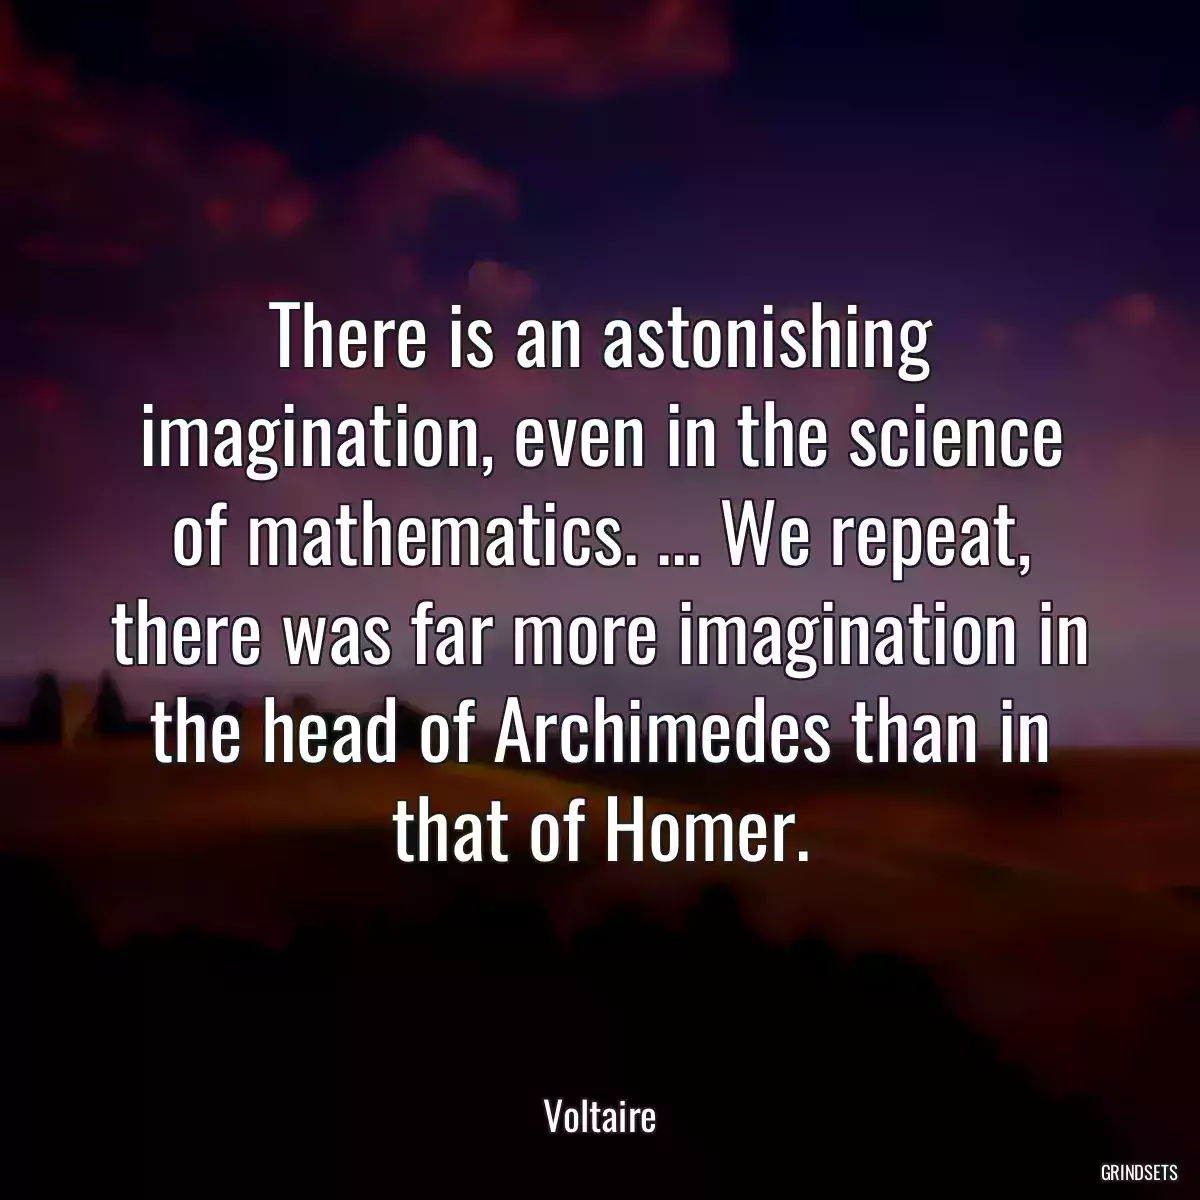 There is an astonishing imagination, even in the science of mathematics. ... We repeat, there was far more imagination in the head of Archimedes than in that of Homer.